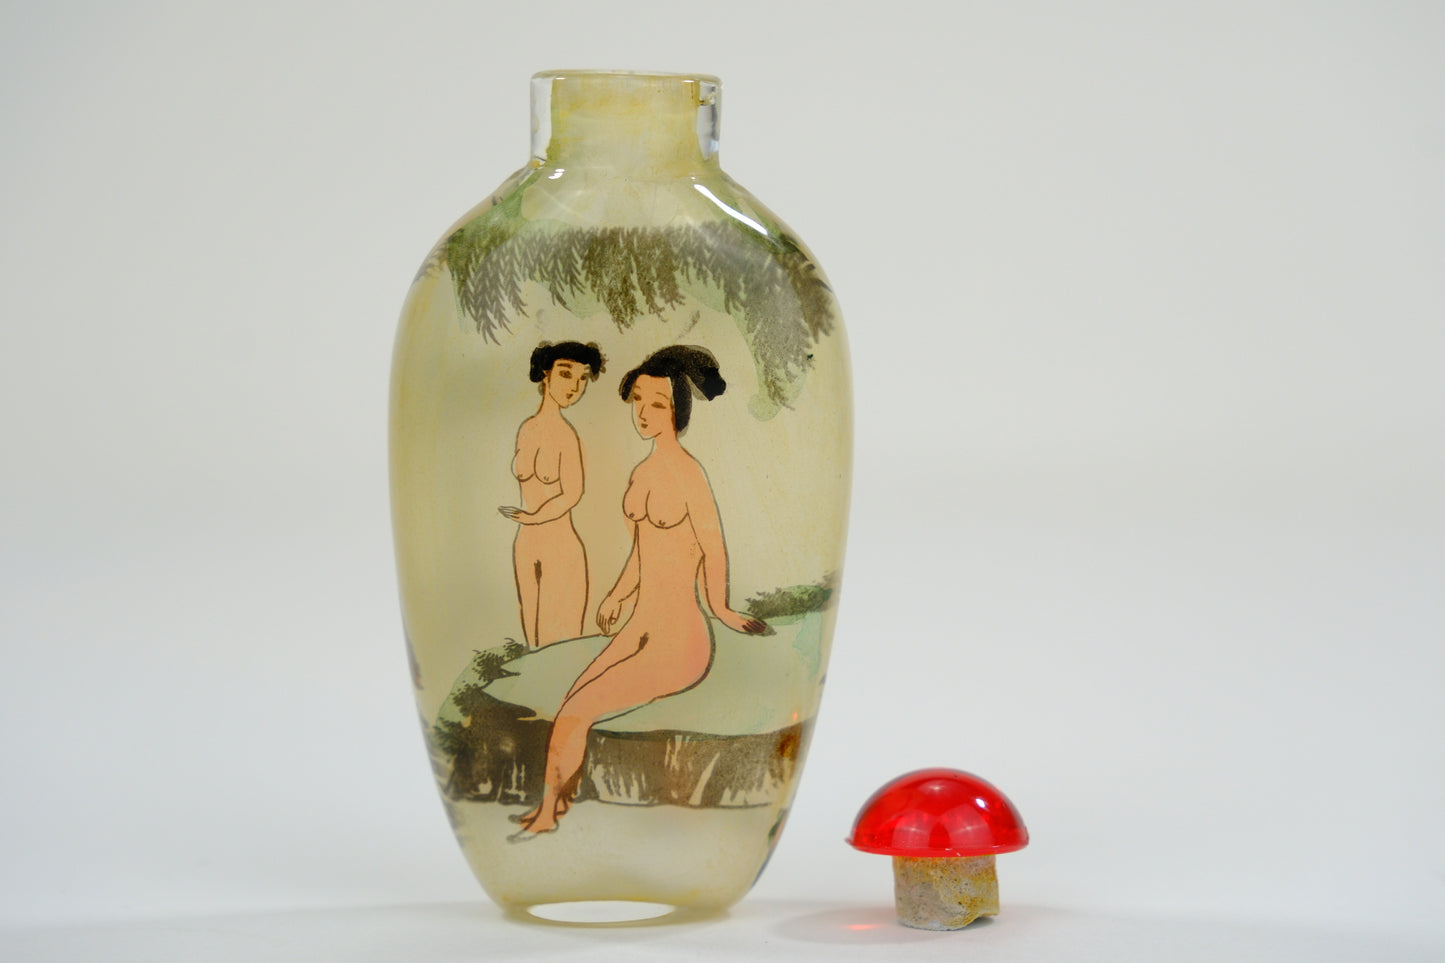 Vintage Chinese Reverse Painted Glass Snuff Bottle Erotic Motif 3"